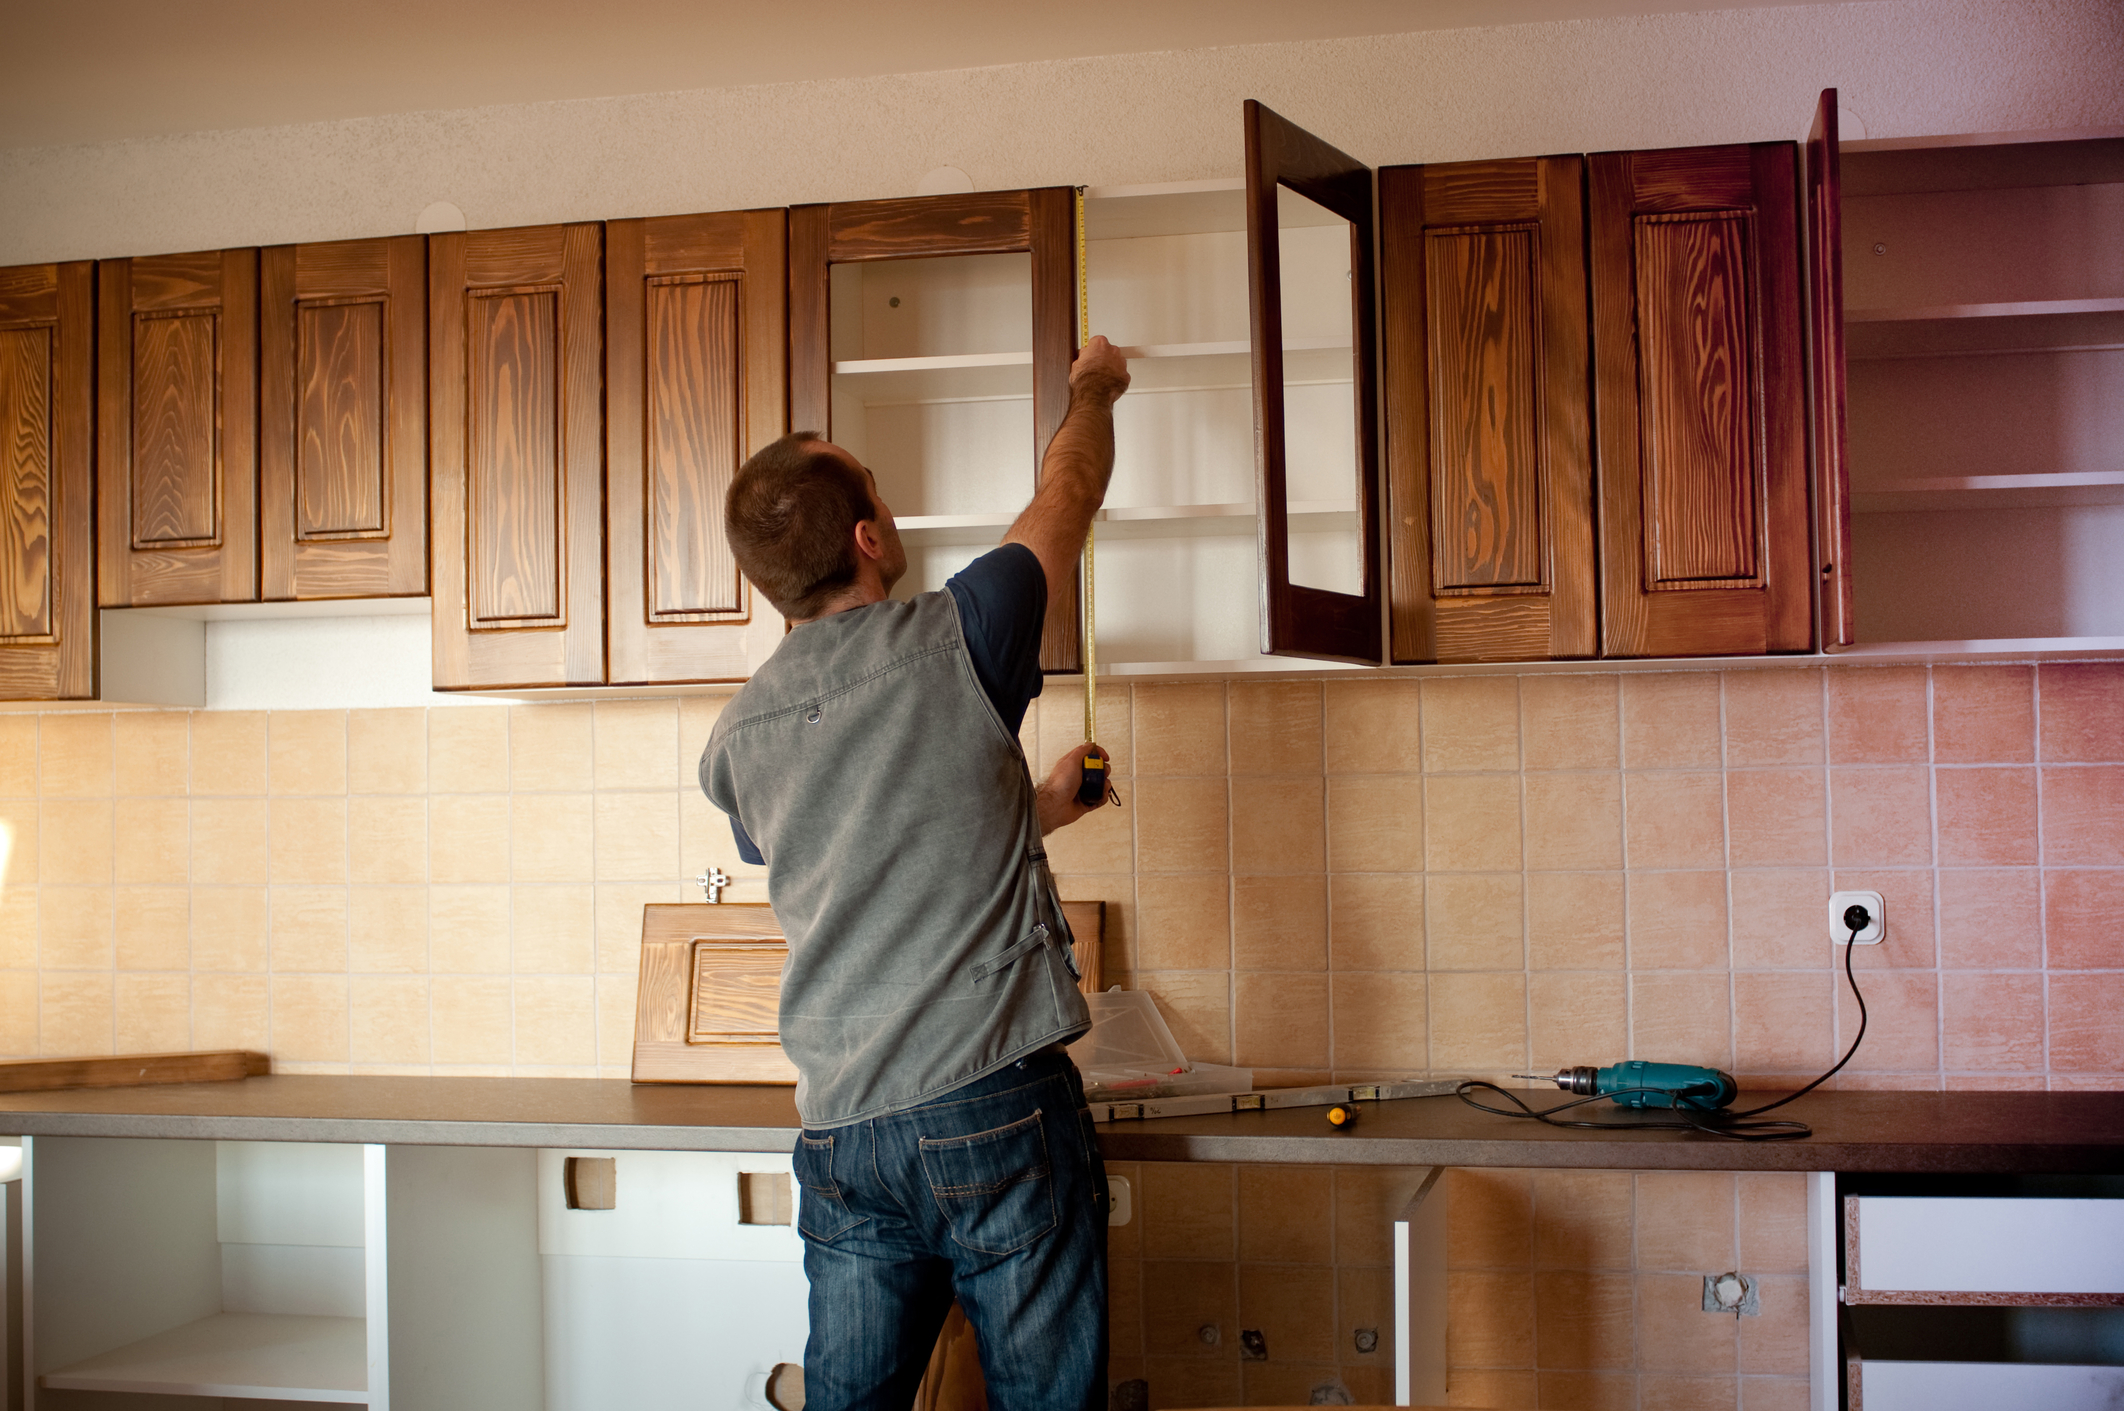 Kitchen Cabinets Refinish Or Replace, When Should Kitchen Cabinets Be Replaced